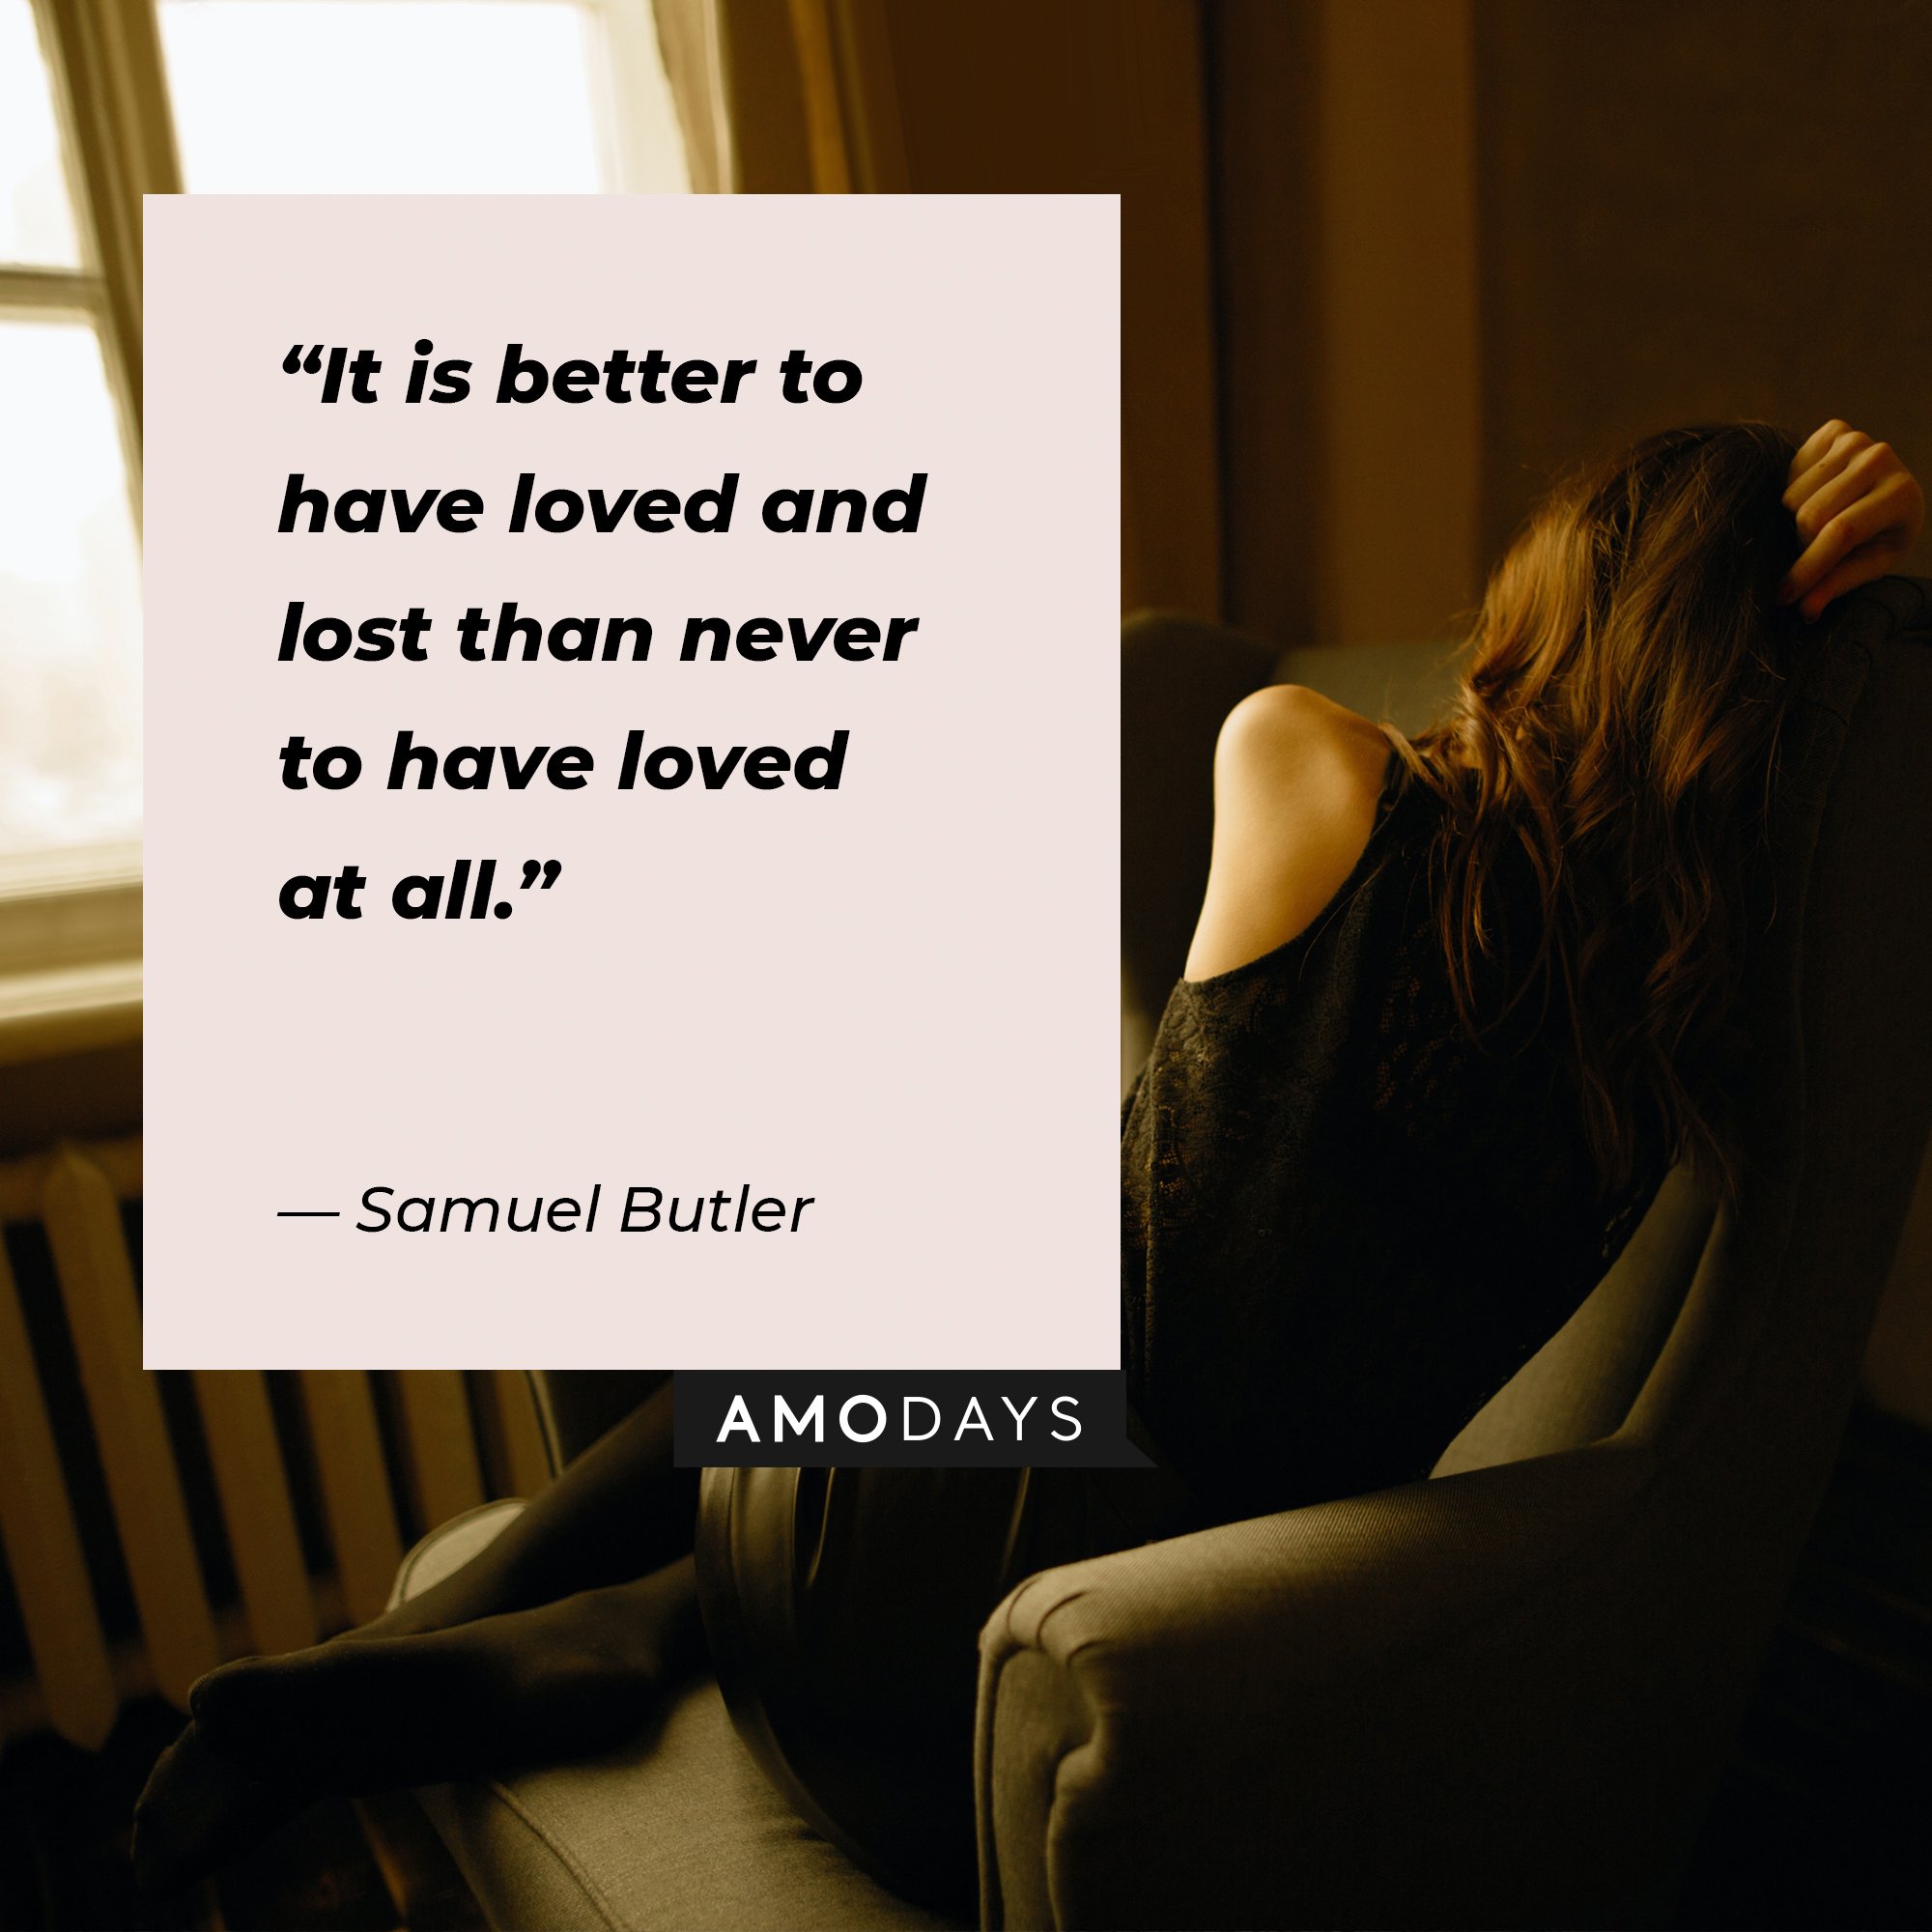 Samuel Butler’s quote:“It is better to have loved and lost than never to have loved at all.” | Image: AmoDays